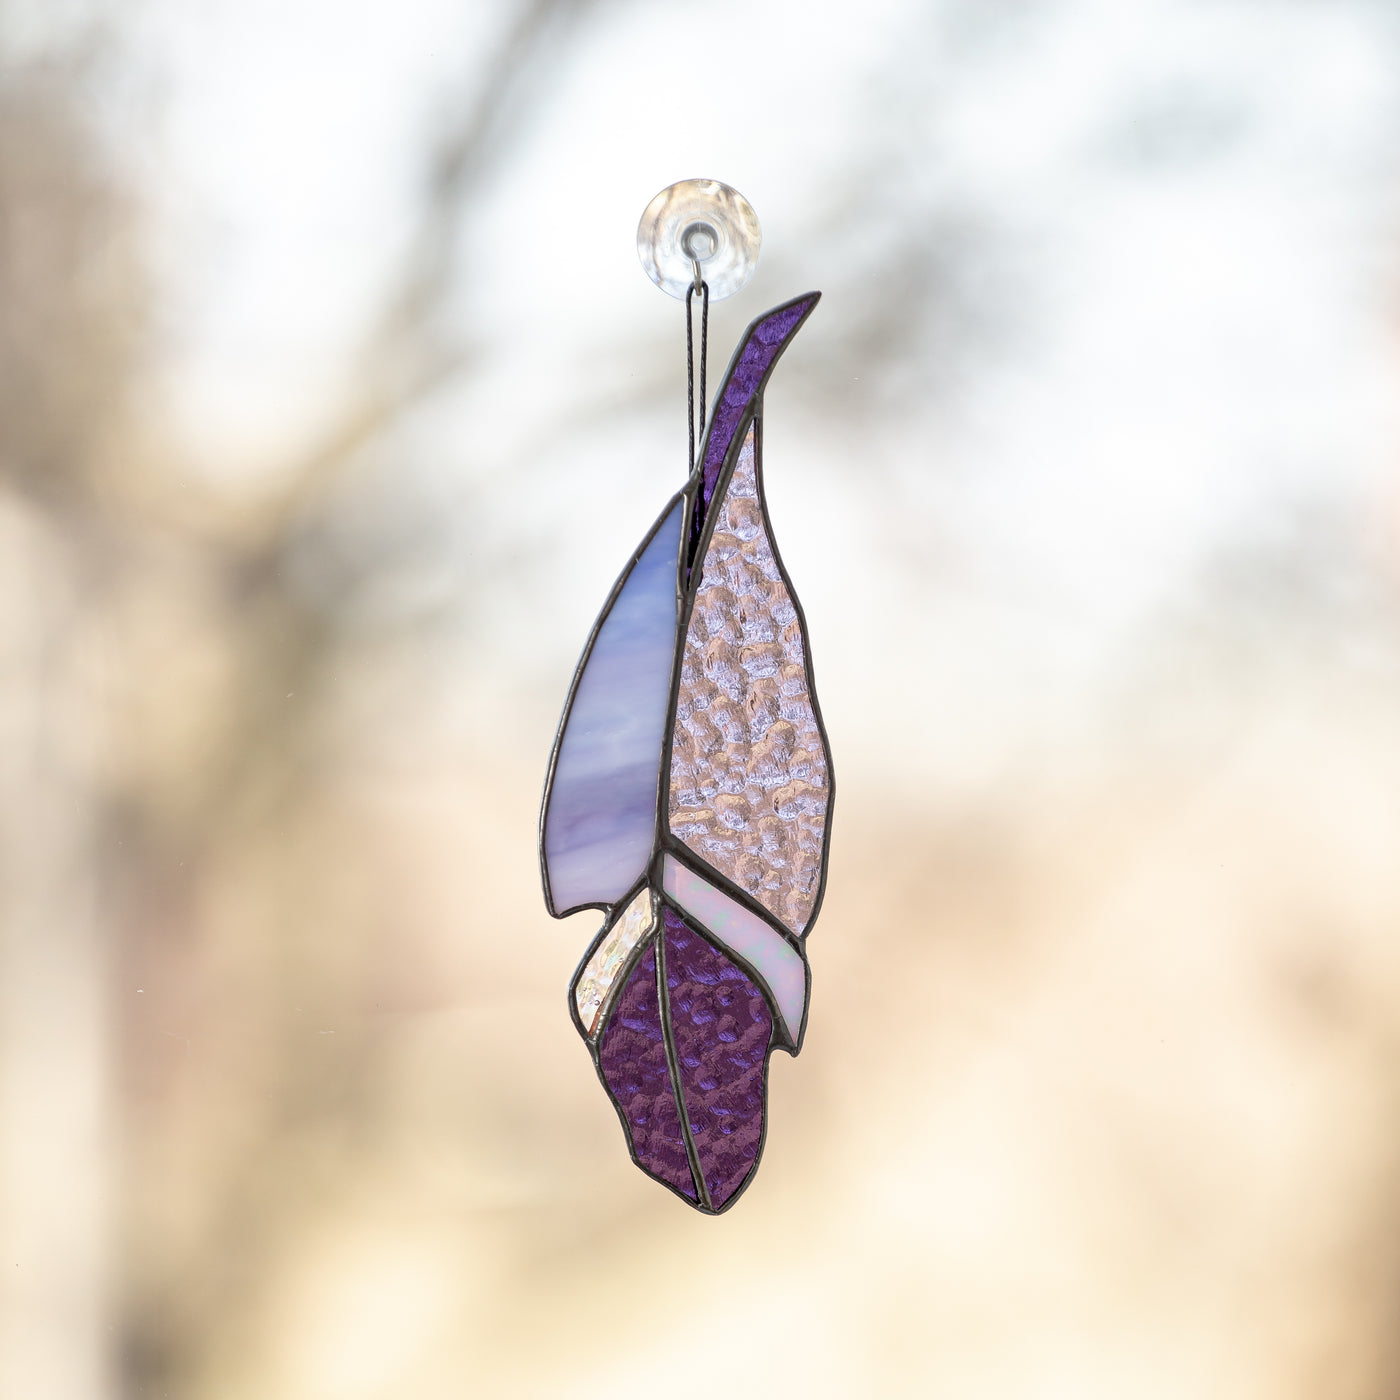 Stained glass feather suncatcher of purple colour